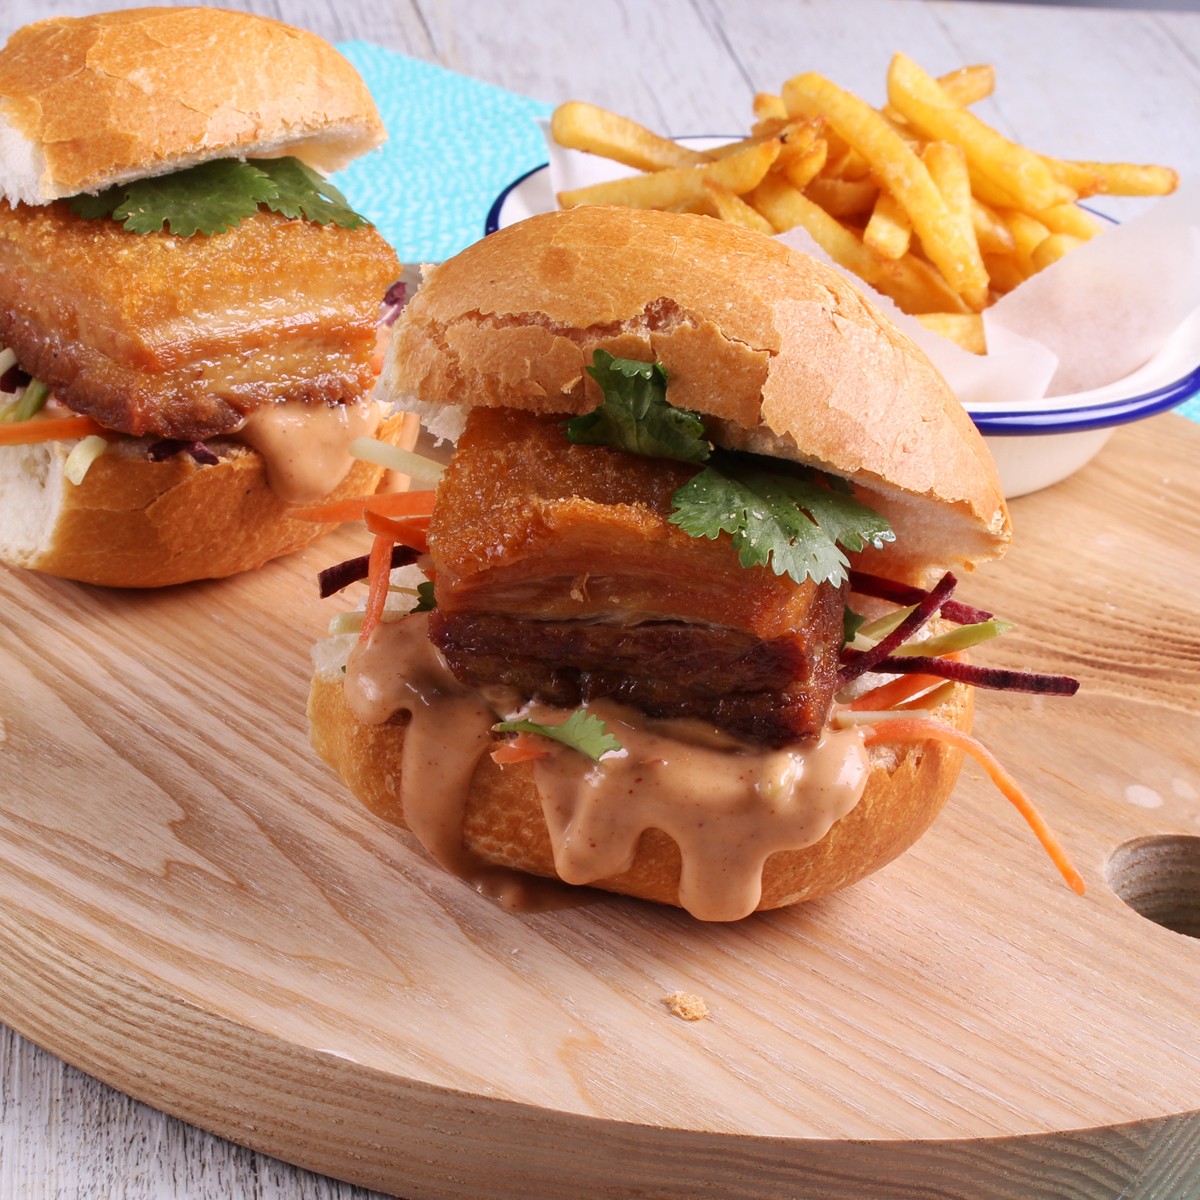 Asian Pork Belly Sliders - Three Aussie Farmers Slow Cooked Pork Belly